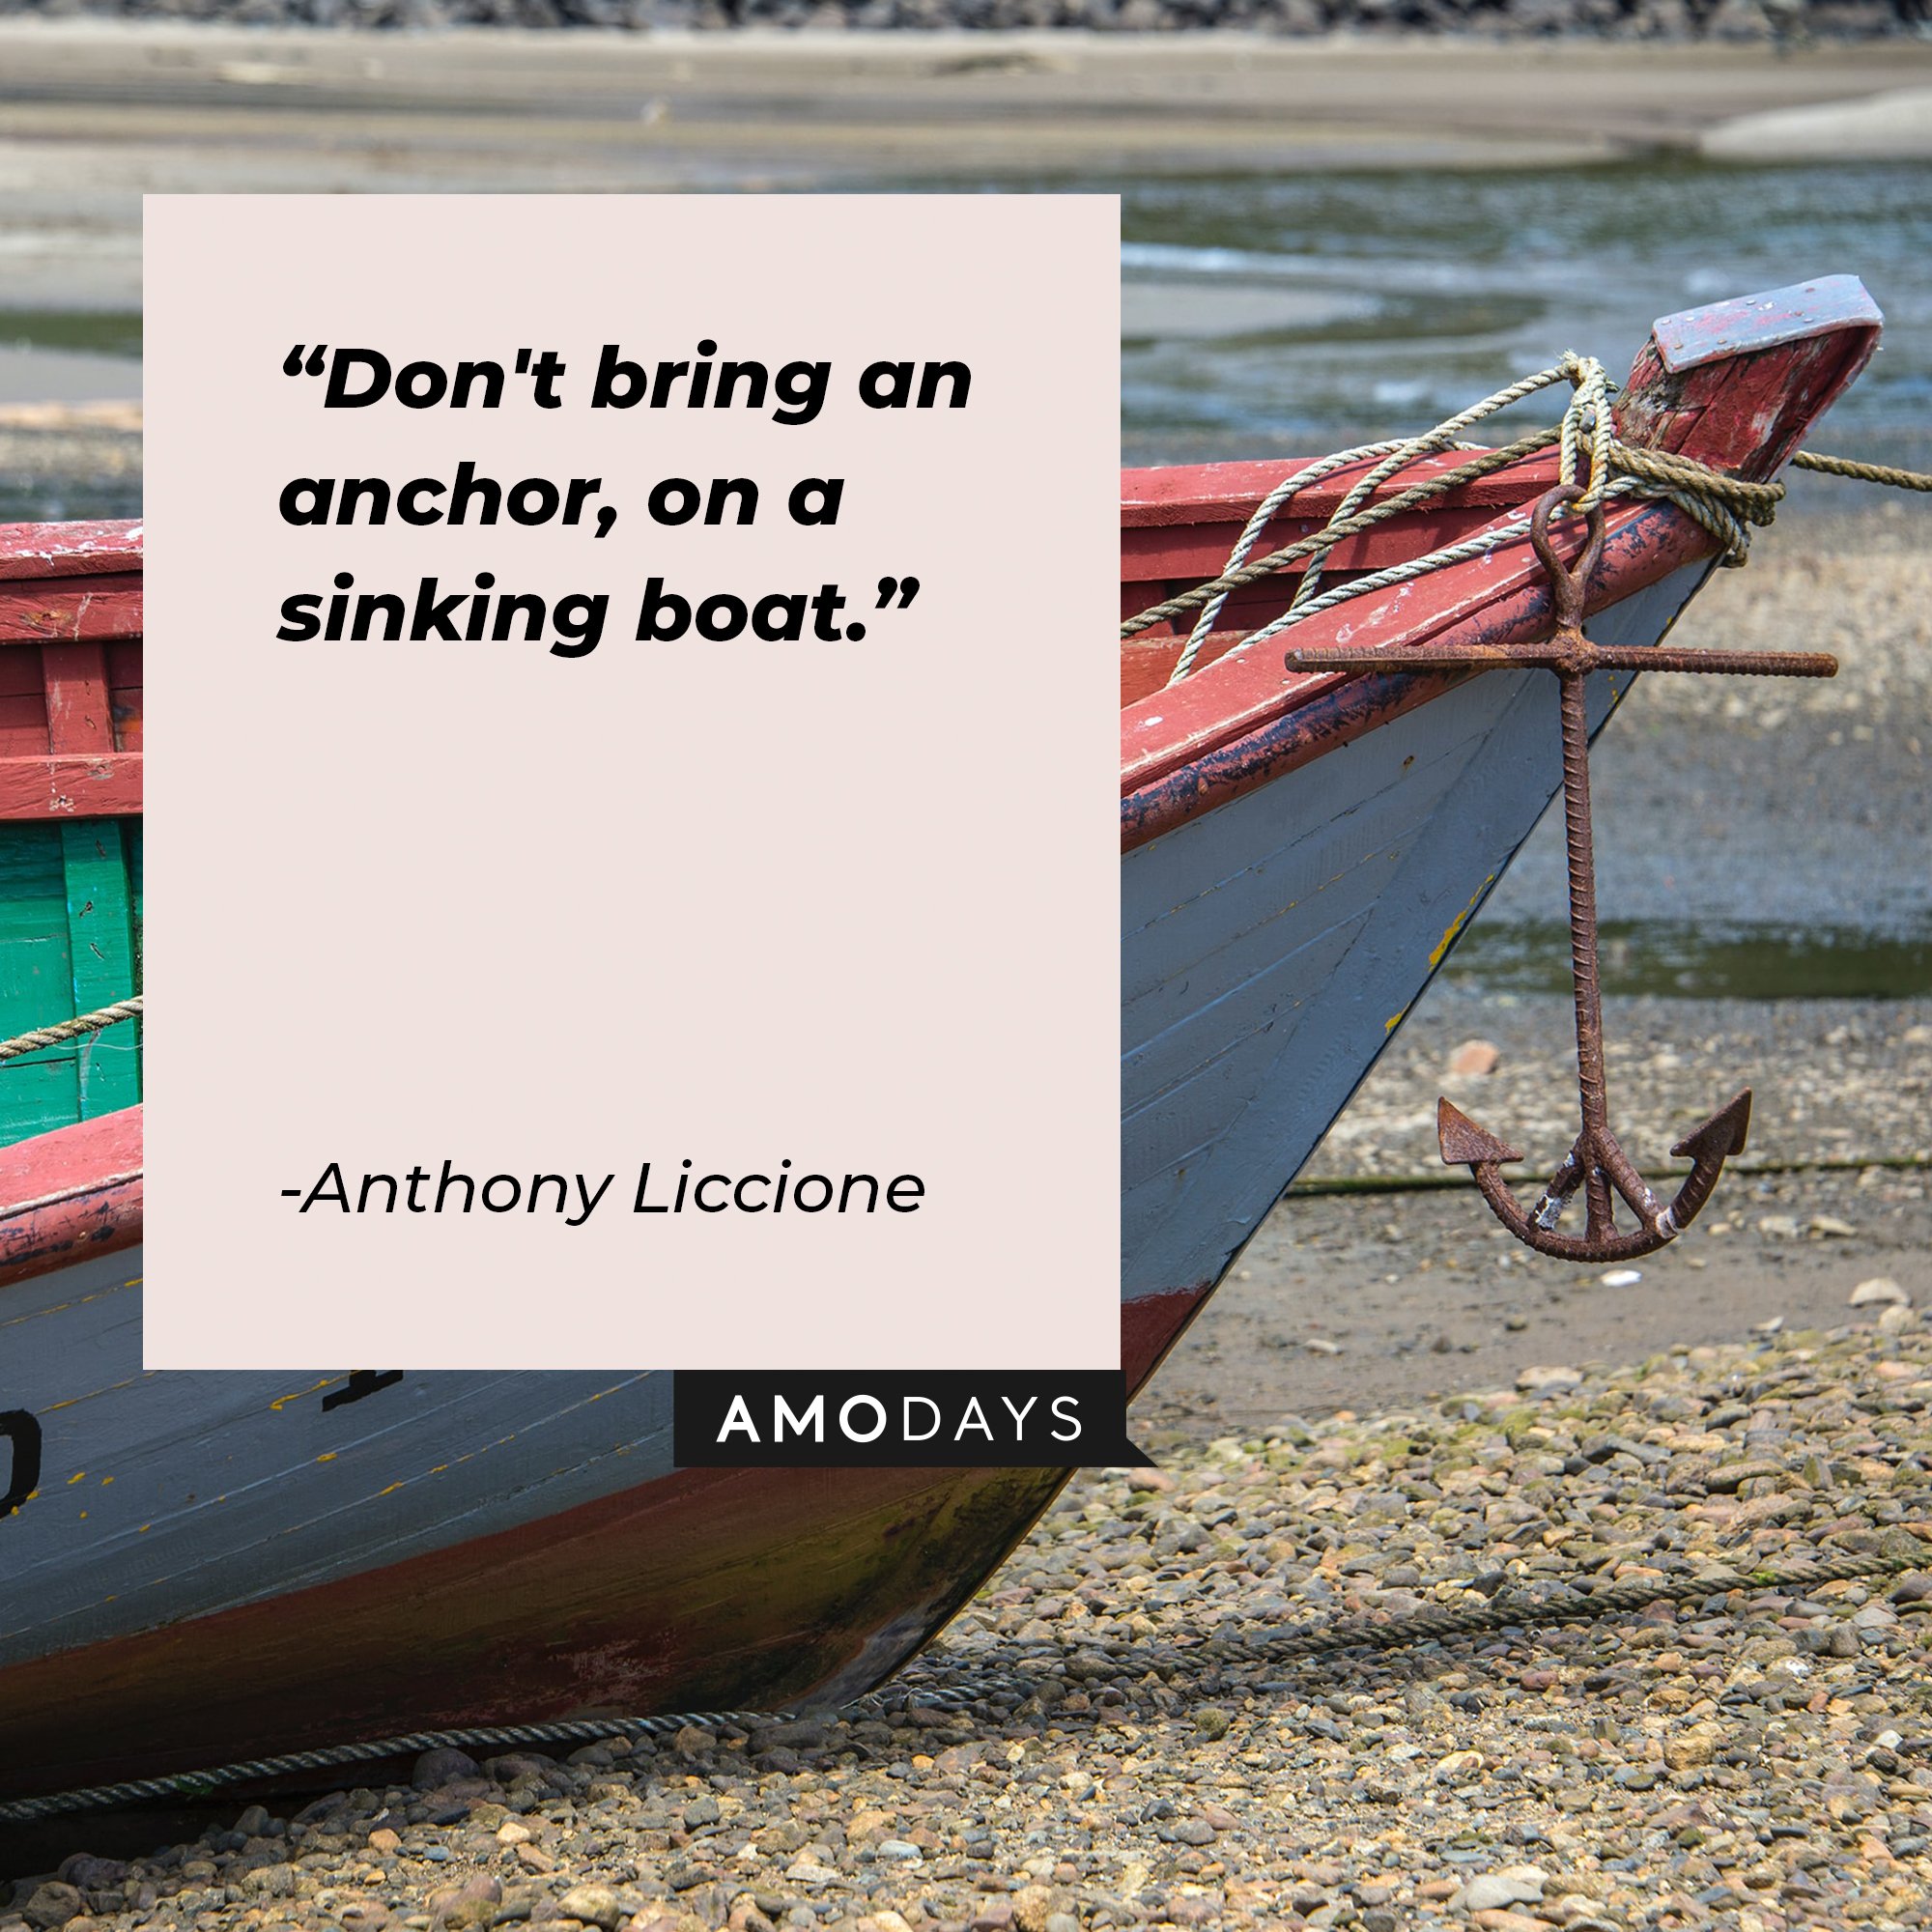 Anthony Liccione's quote: "Don't bring an anchor, on a sinking boat." | Image: AmoDays